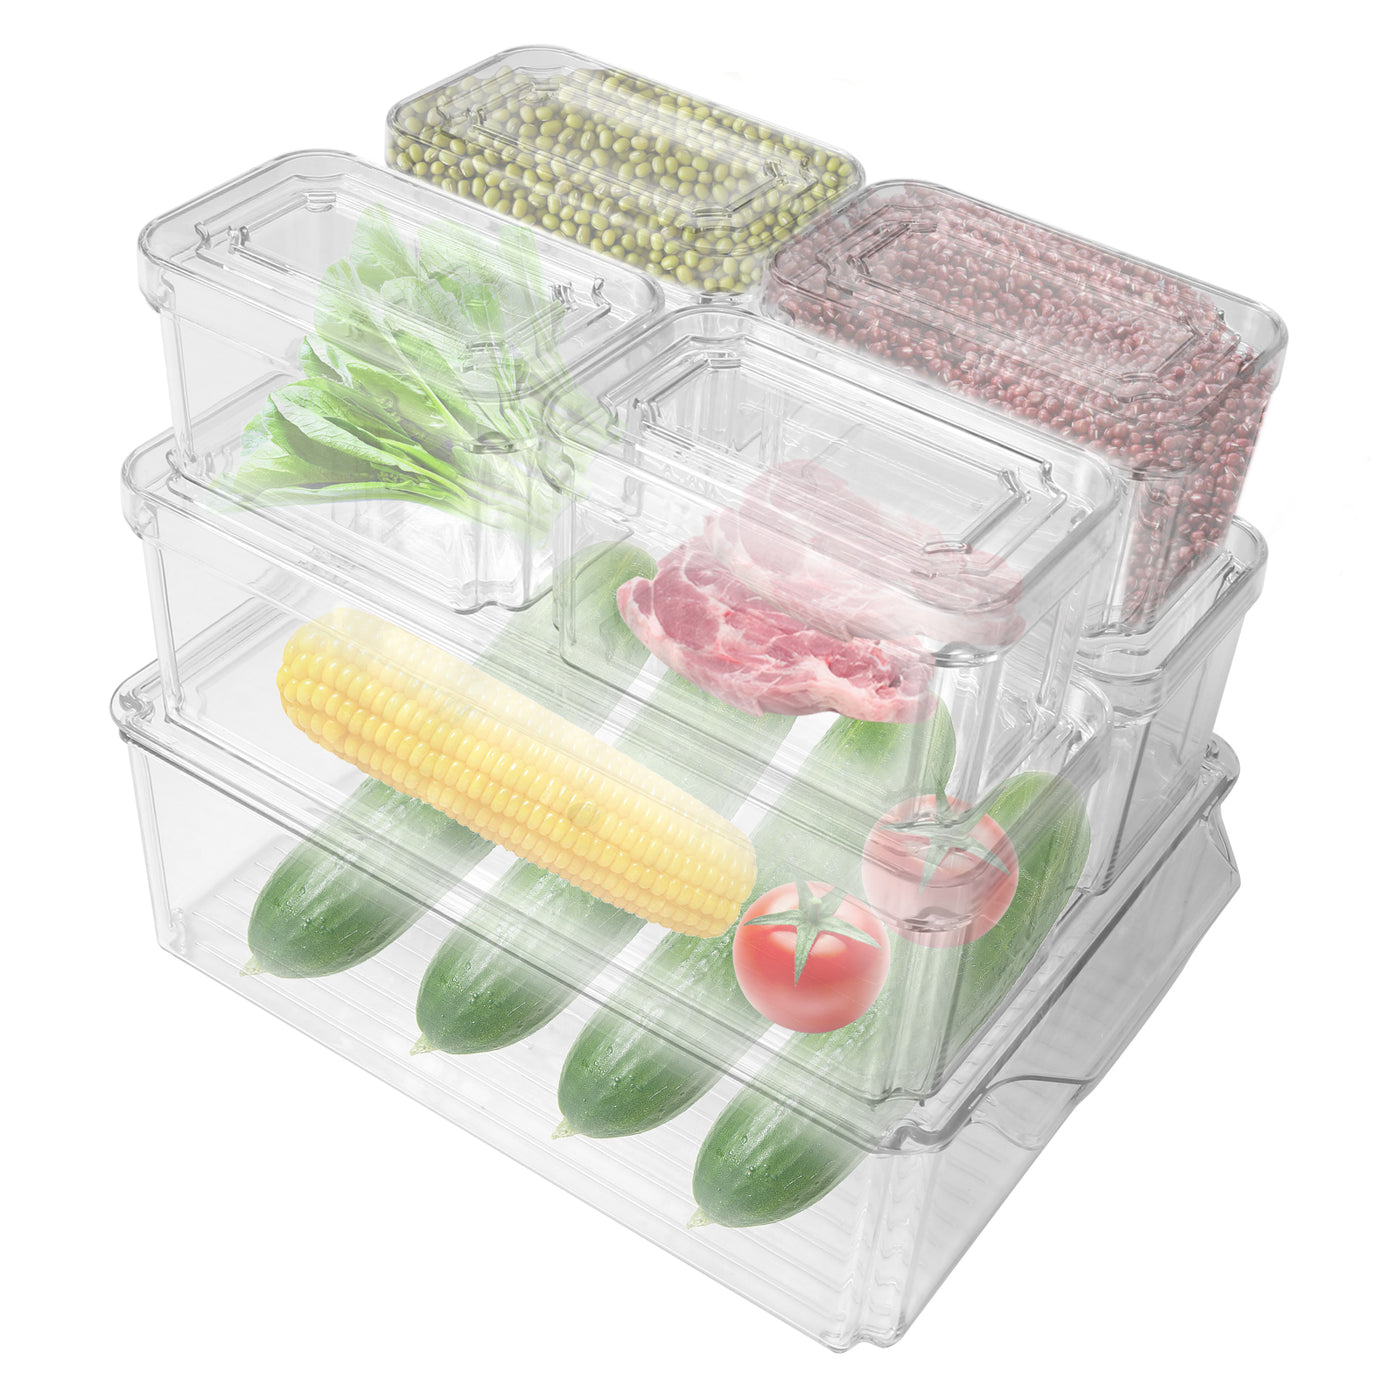 7 PCS Refrigerator Organizer Bins Food Containers with Various Size Storage Bins